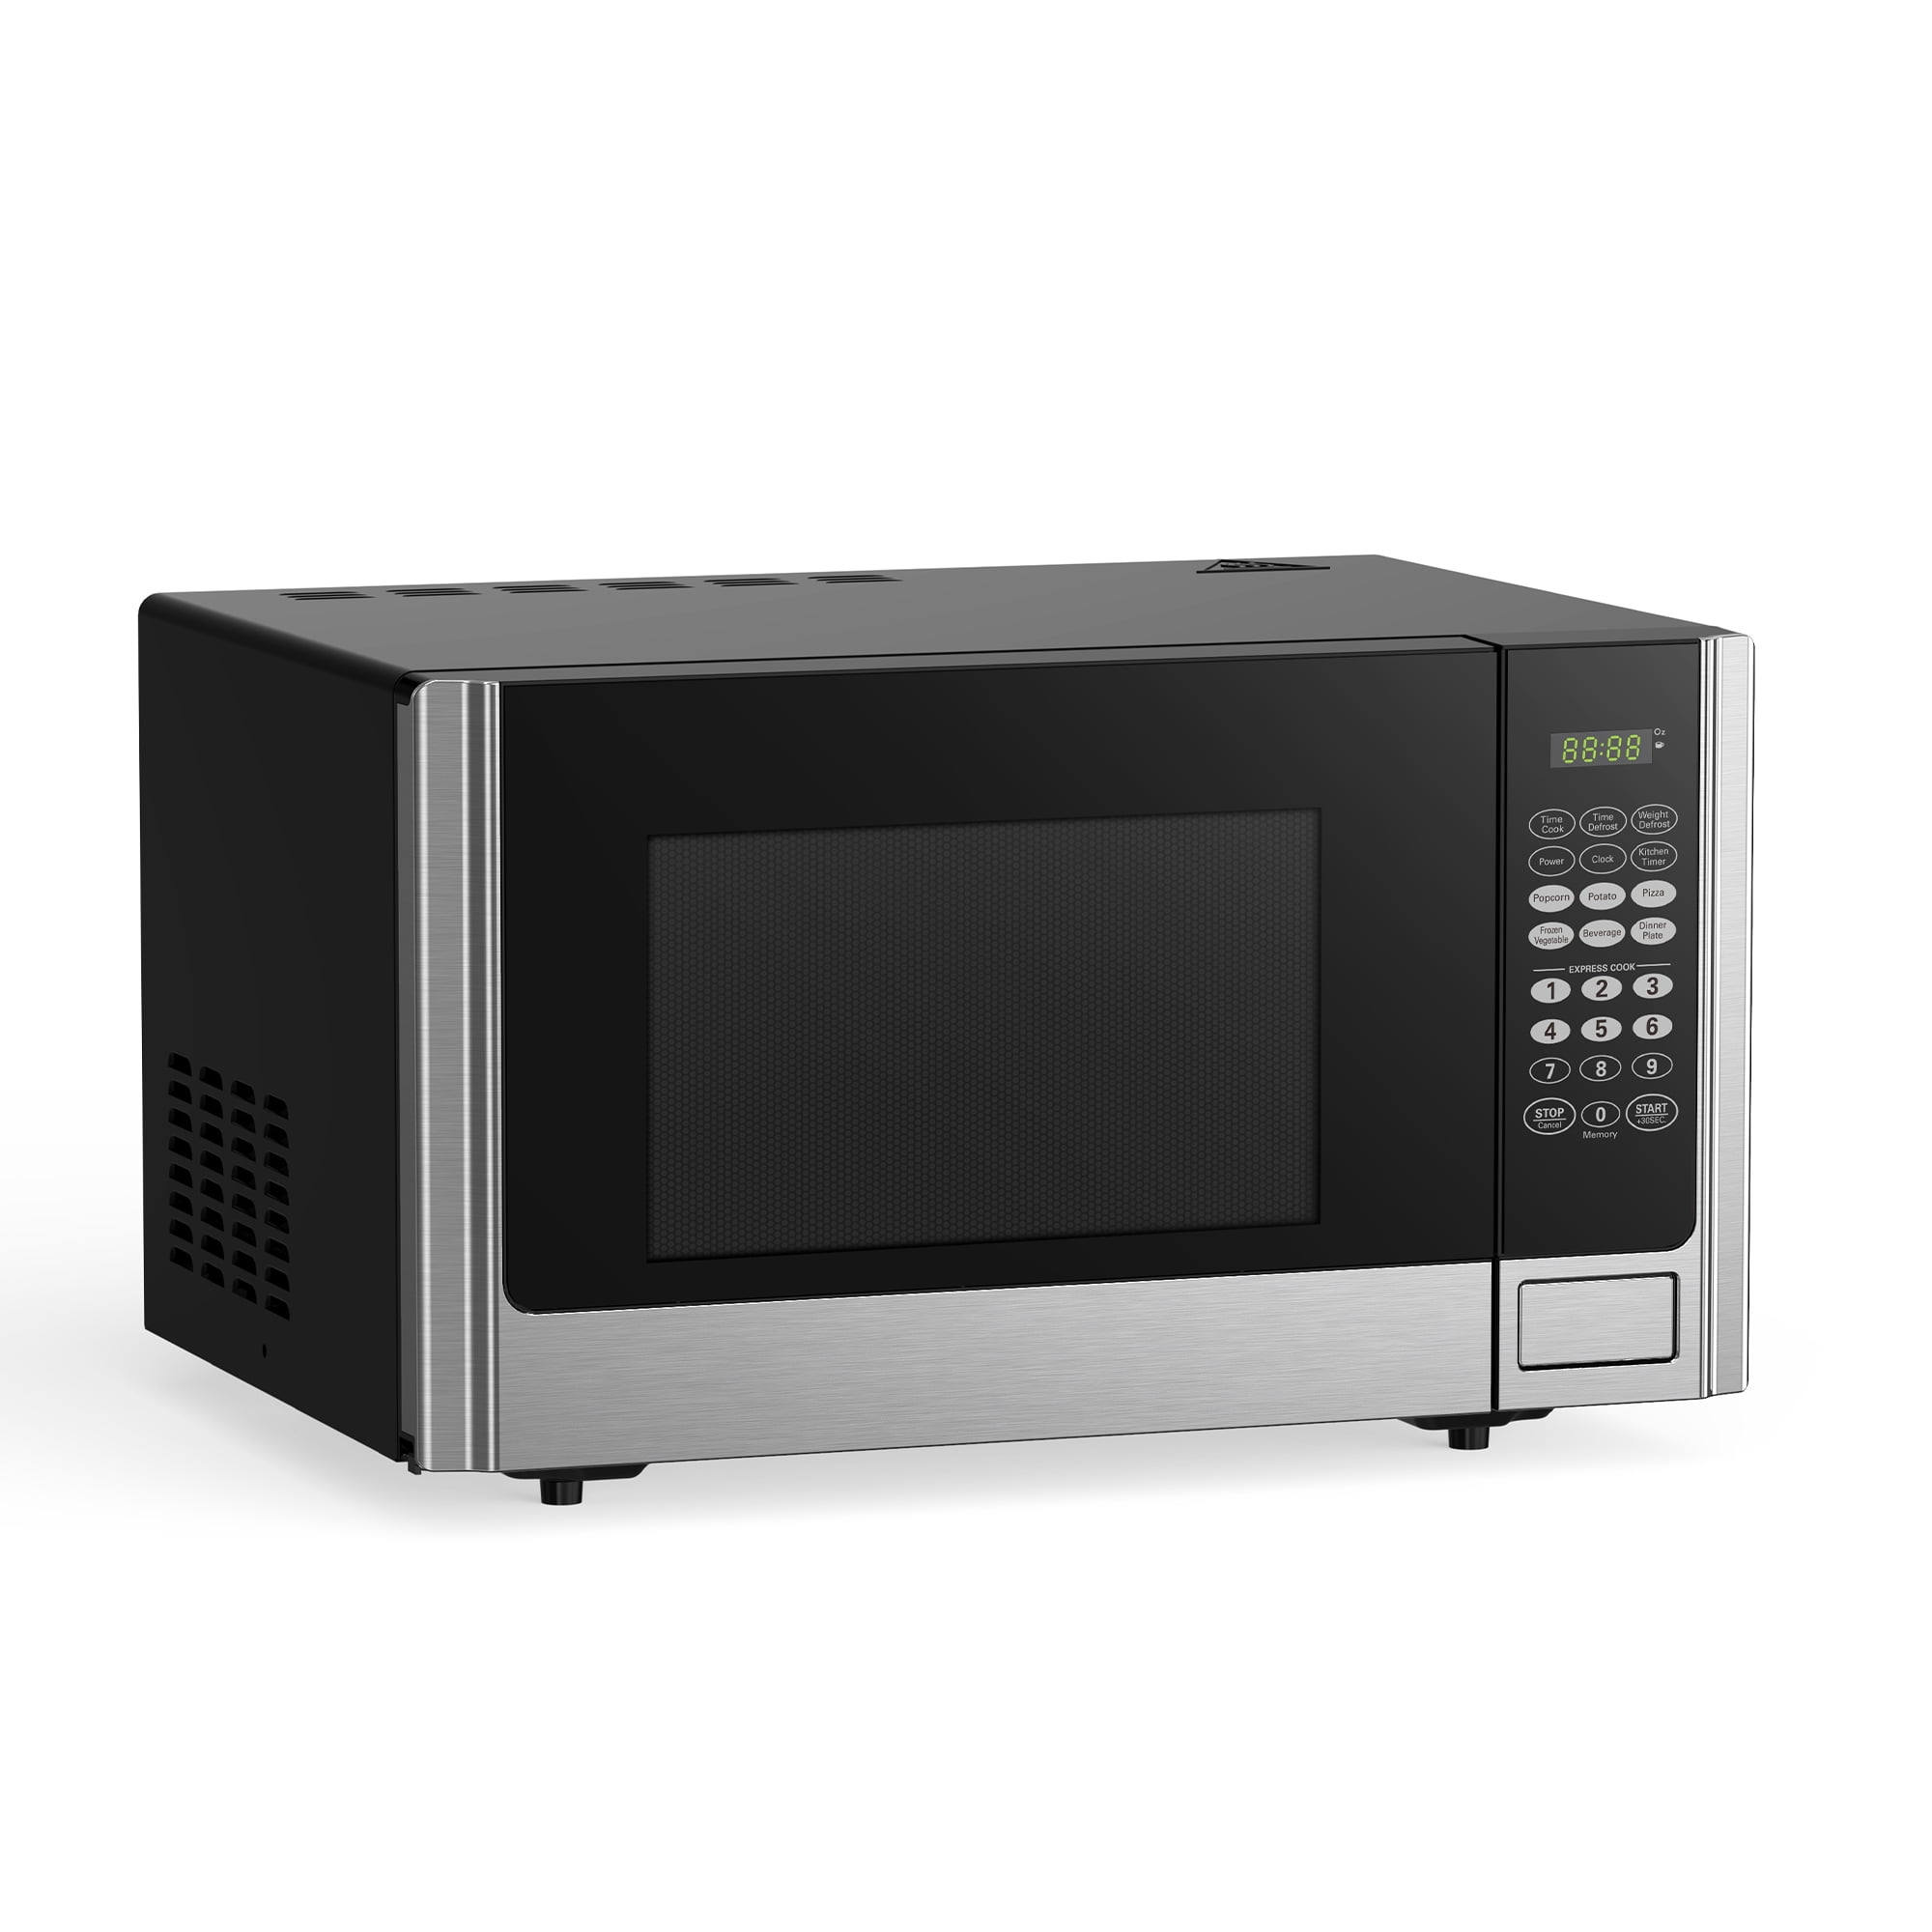 BLACK+DECKER 0.9 cu ft 900W Microwave Oven - Stainless Steel for Sale in  San Antonio, TX - OfferUp